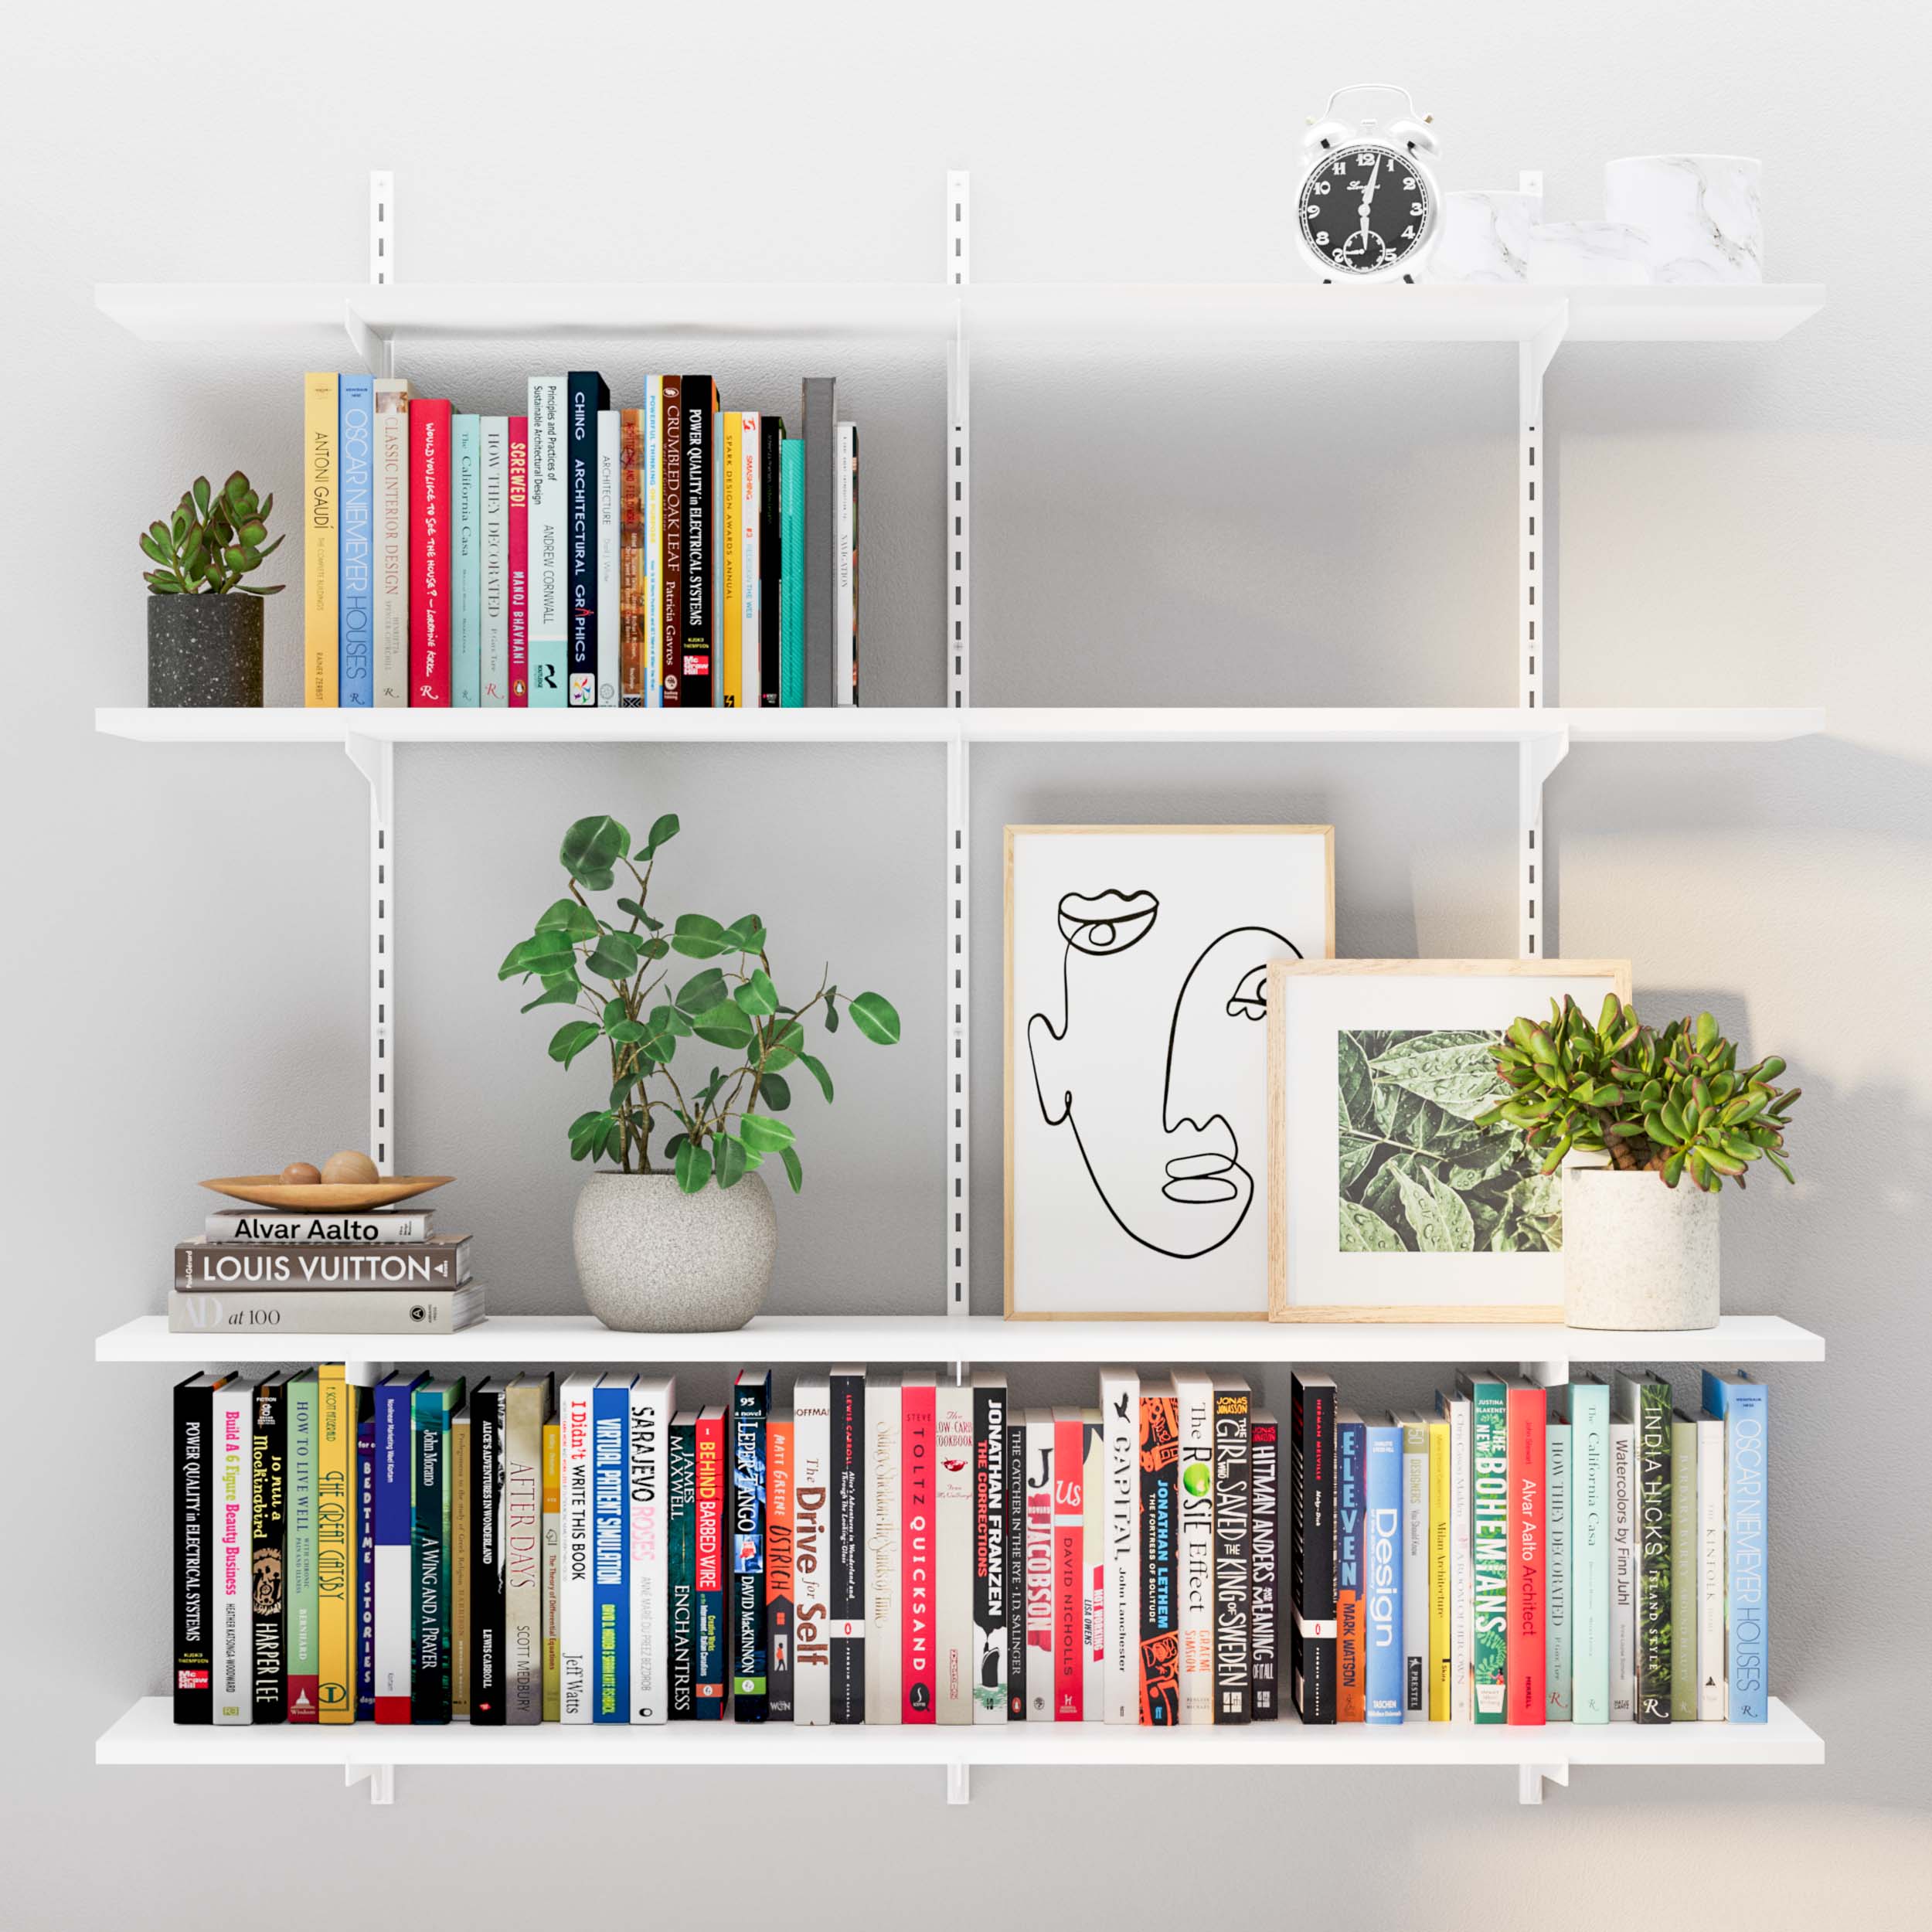 White shelves organized with books, plants, and line-art, creating a serene workspace.